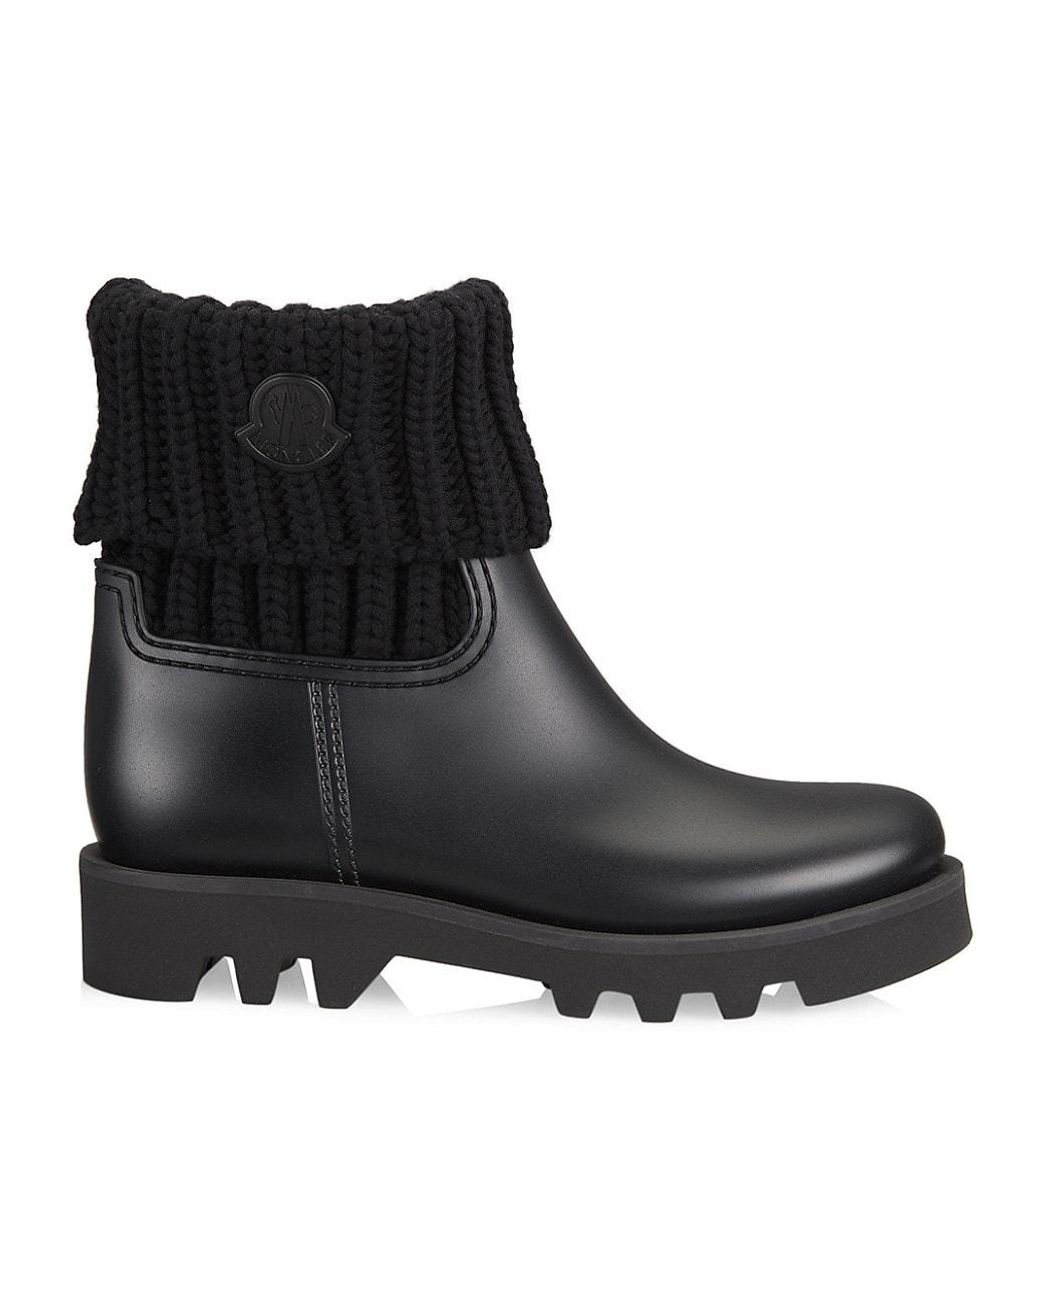 Moncler Ginette Wool-trim Rain Boots in Black | Lyst